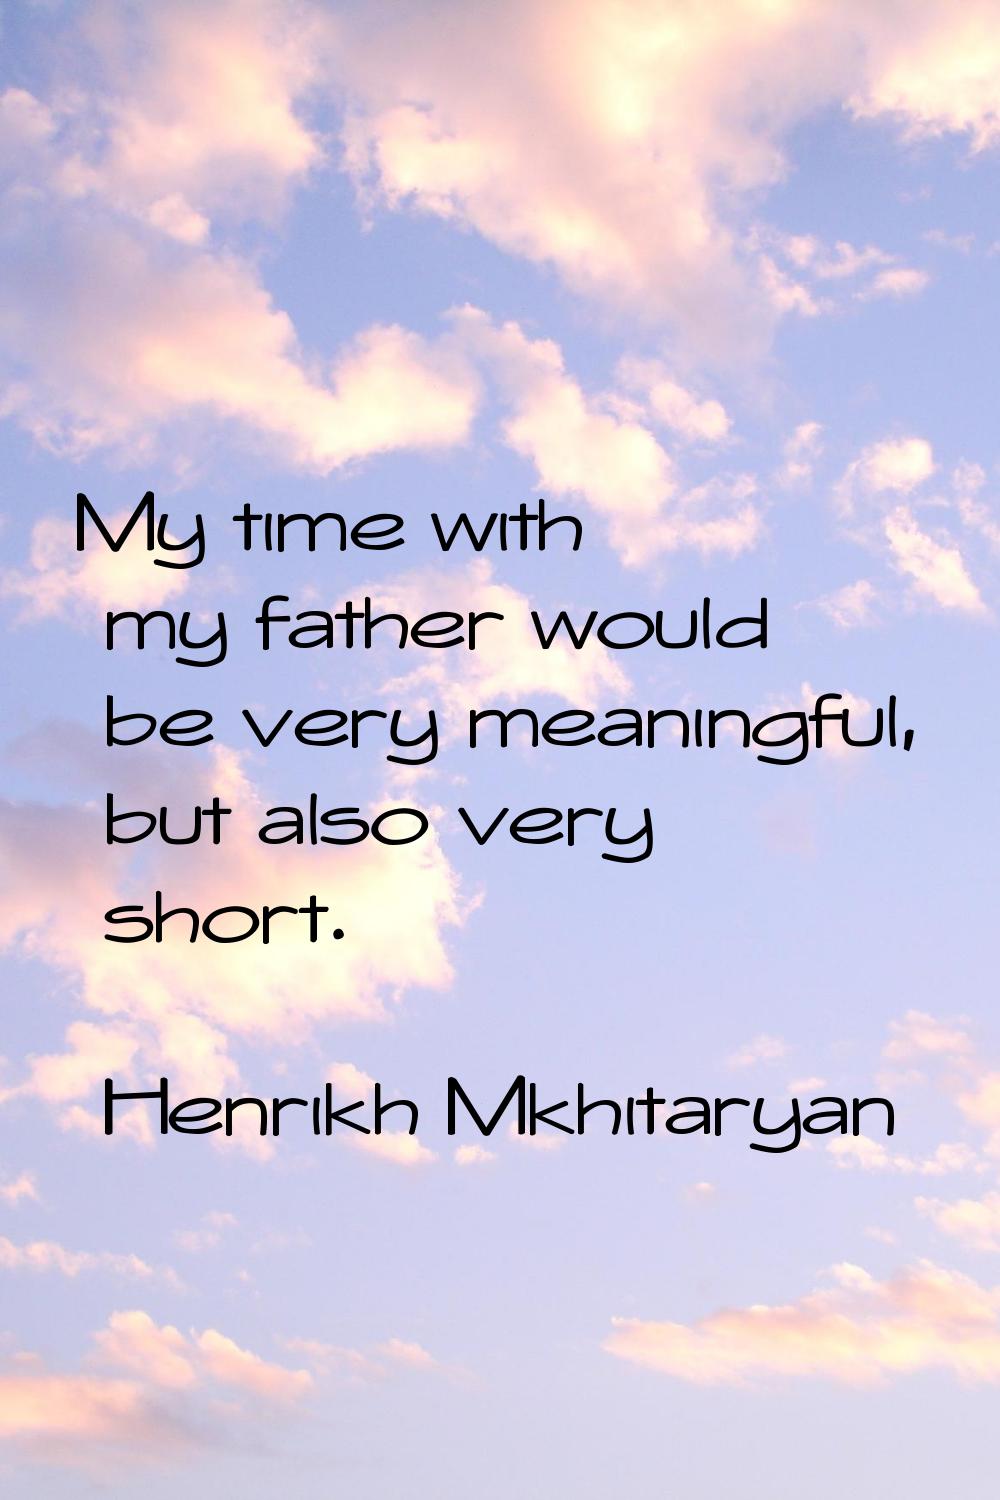 My time with my father would be very meaningful, but also very short.